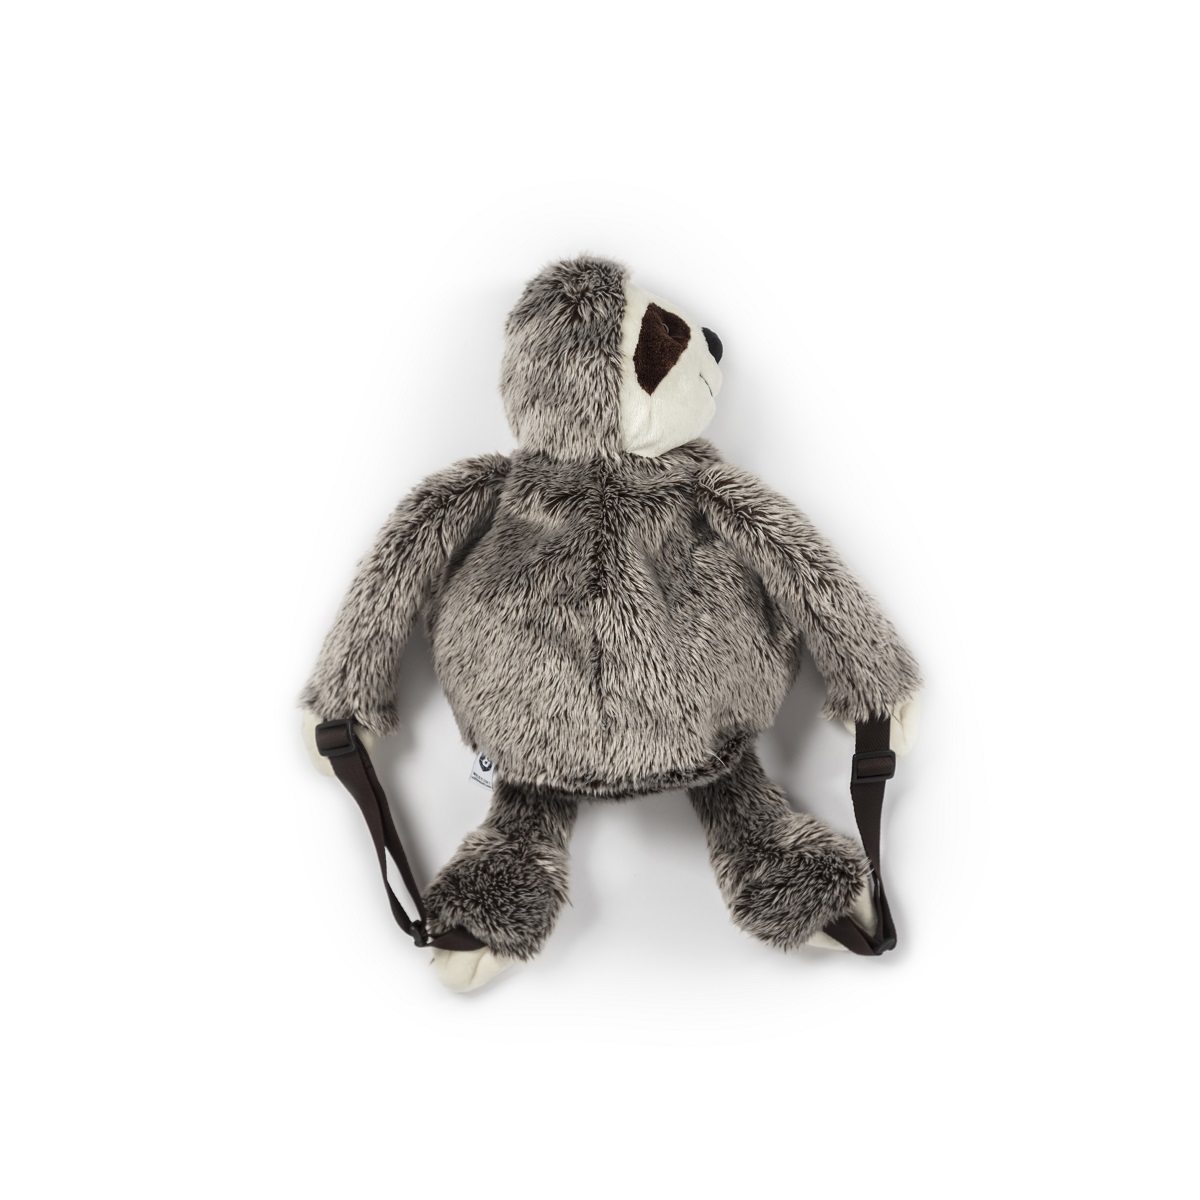 Backpack, Sloth PRE-ORDER FOR LATE JUNE